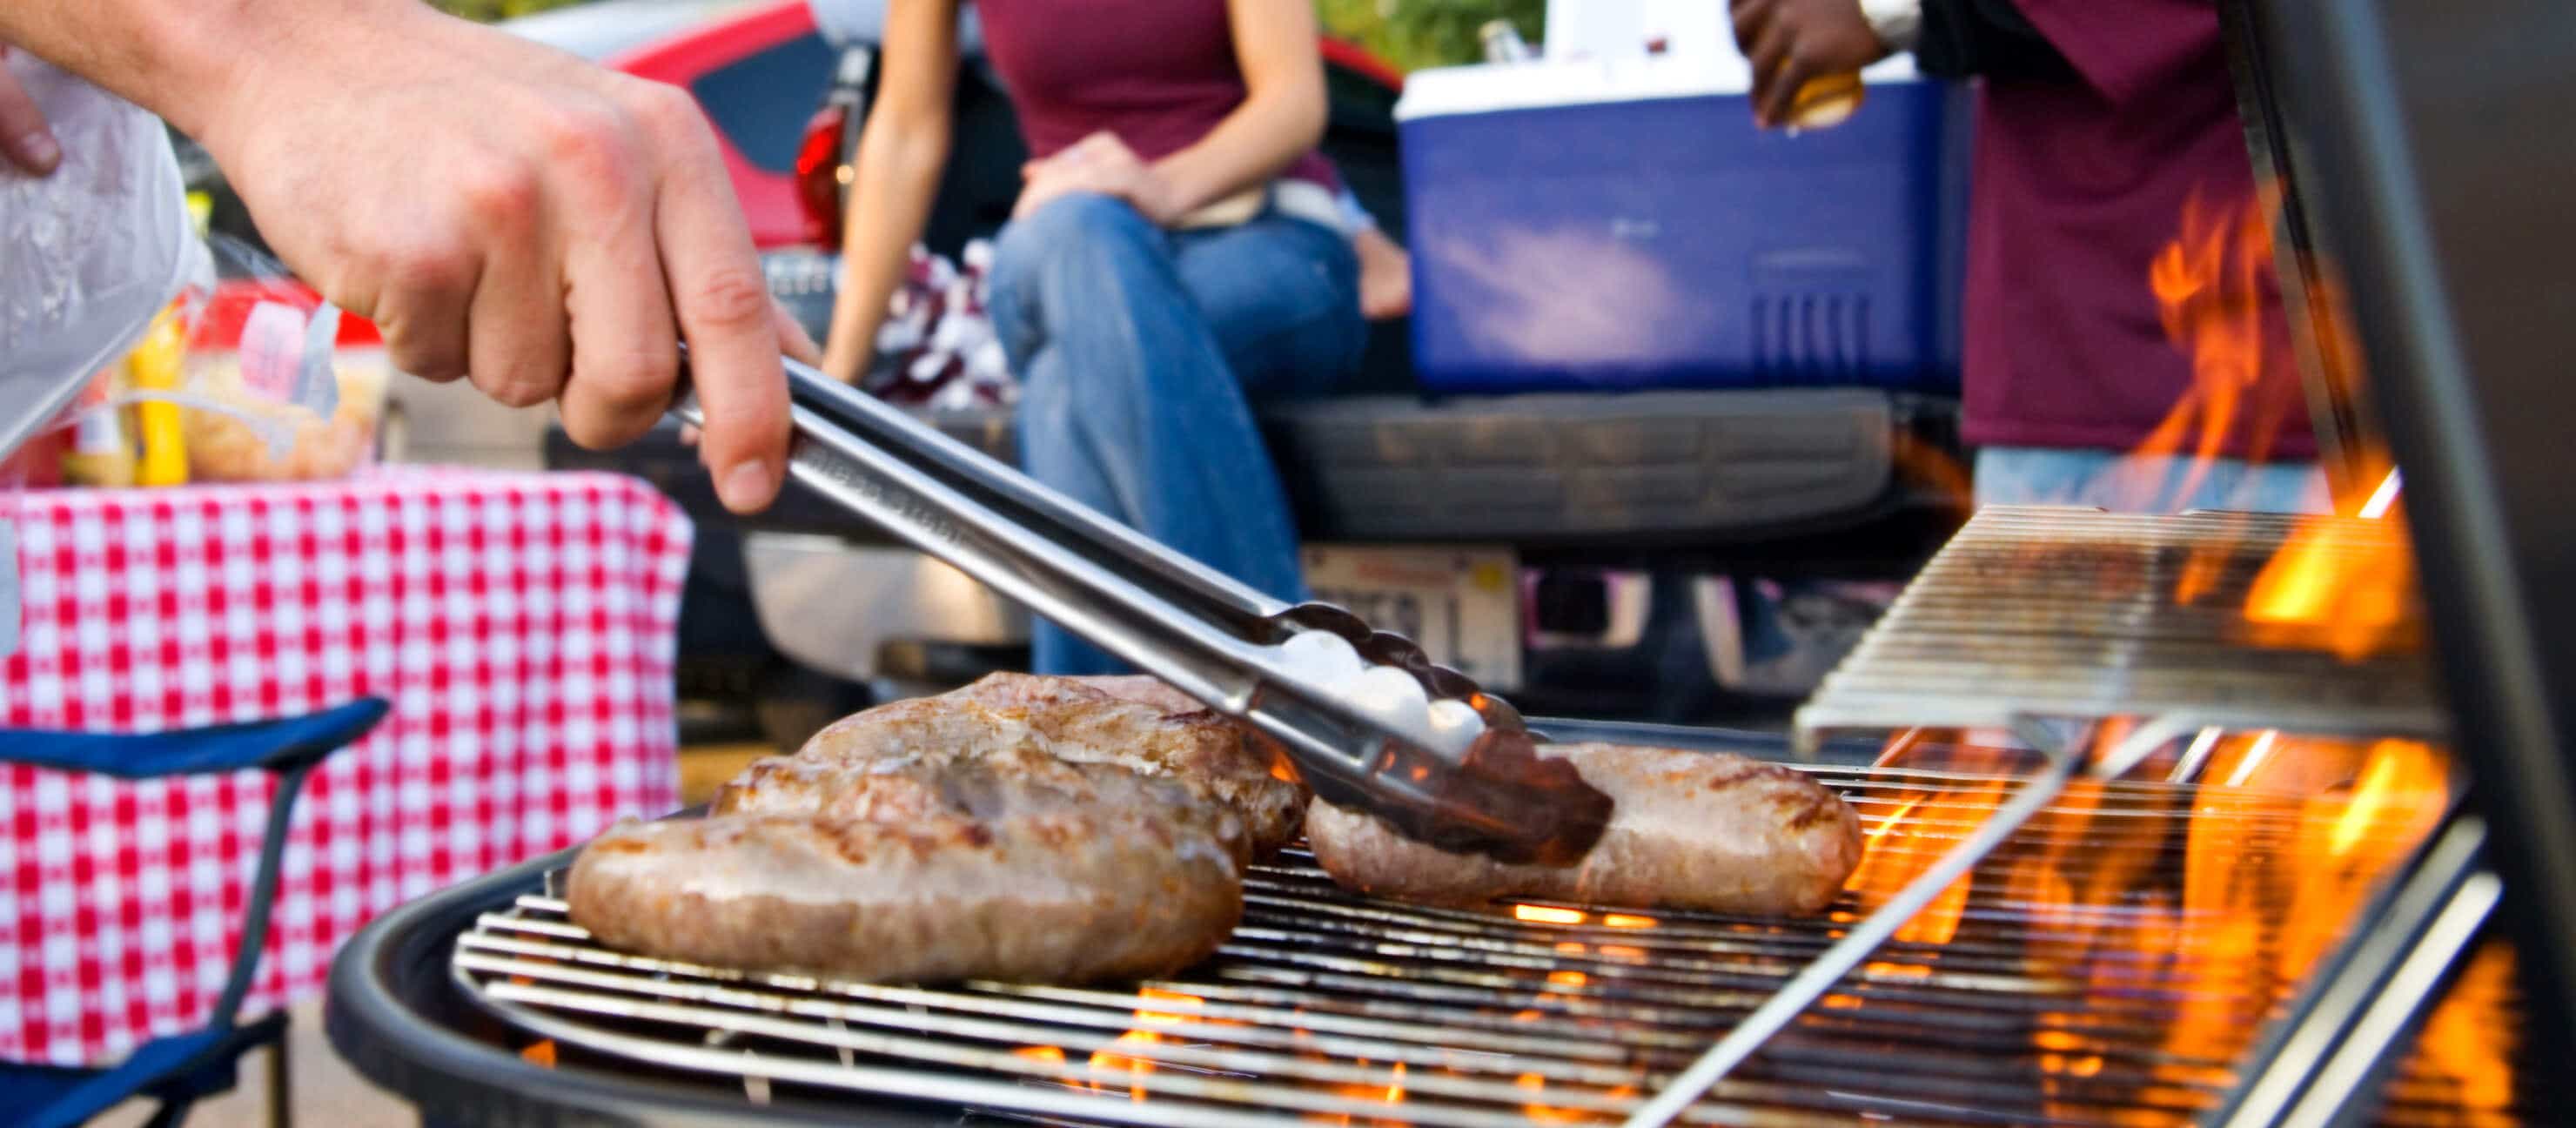 Tailgating checklist: Sausage On The Grill At Tailgate Party

                            